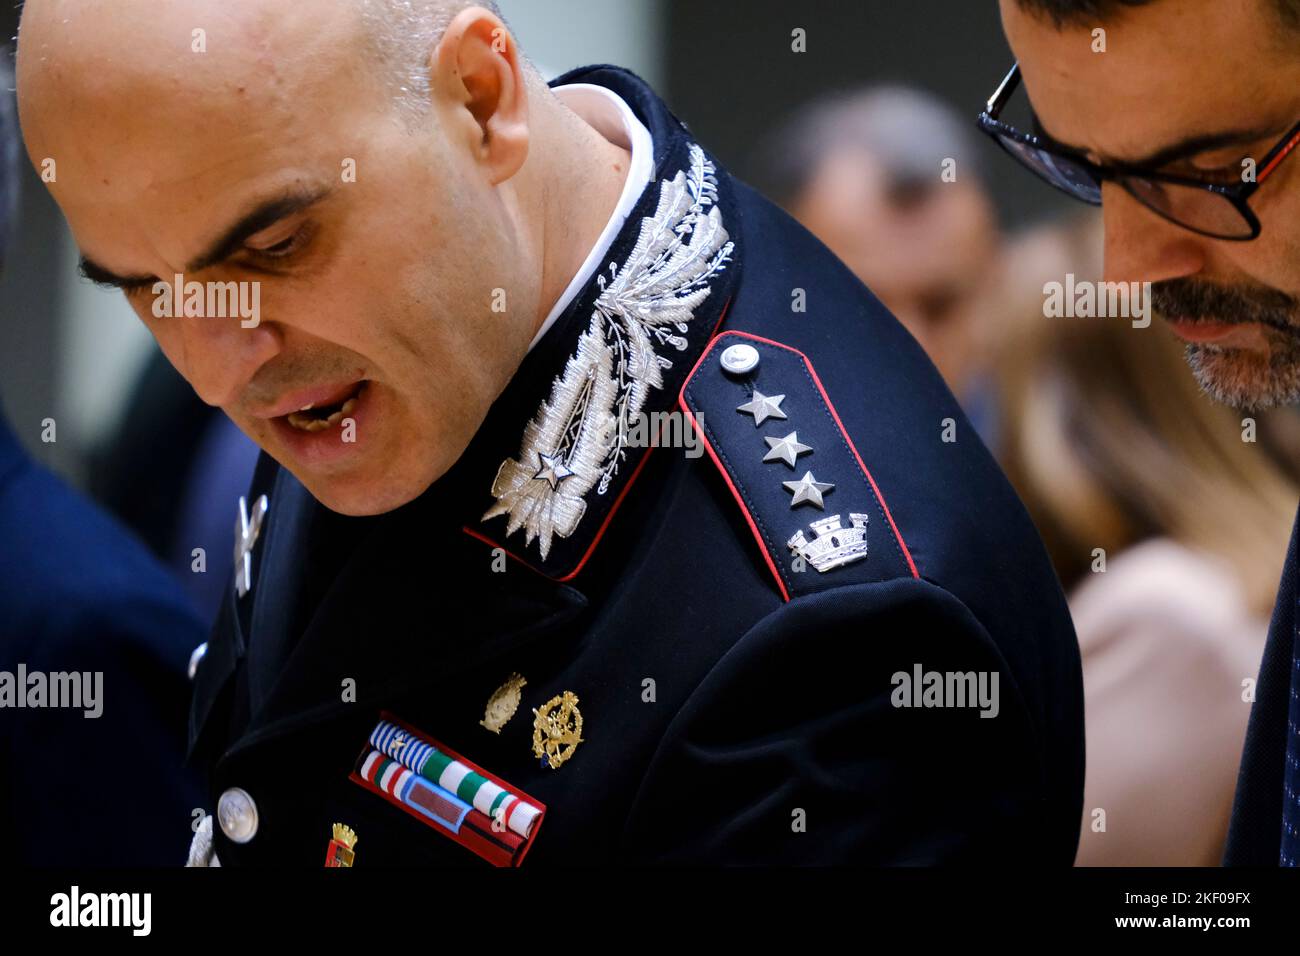 Brussels, Belgium. 15th Nov, 2022. An Italian army official during a Meeting of EU defense ministers at the EU Council building in Brussels, Belgium on Nov. 15, 2022. Credit: ALEXANDROS MICHAILIDIS/Alamy Live News Stock Photo